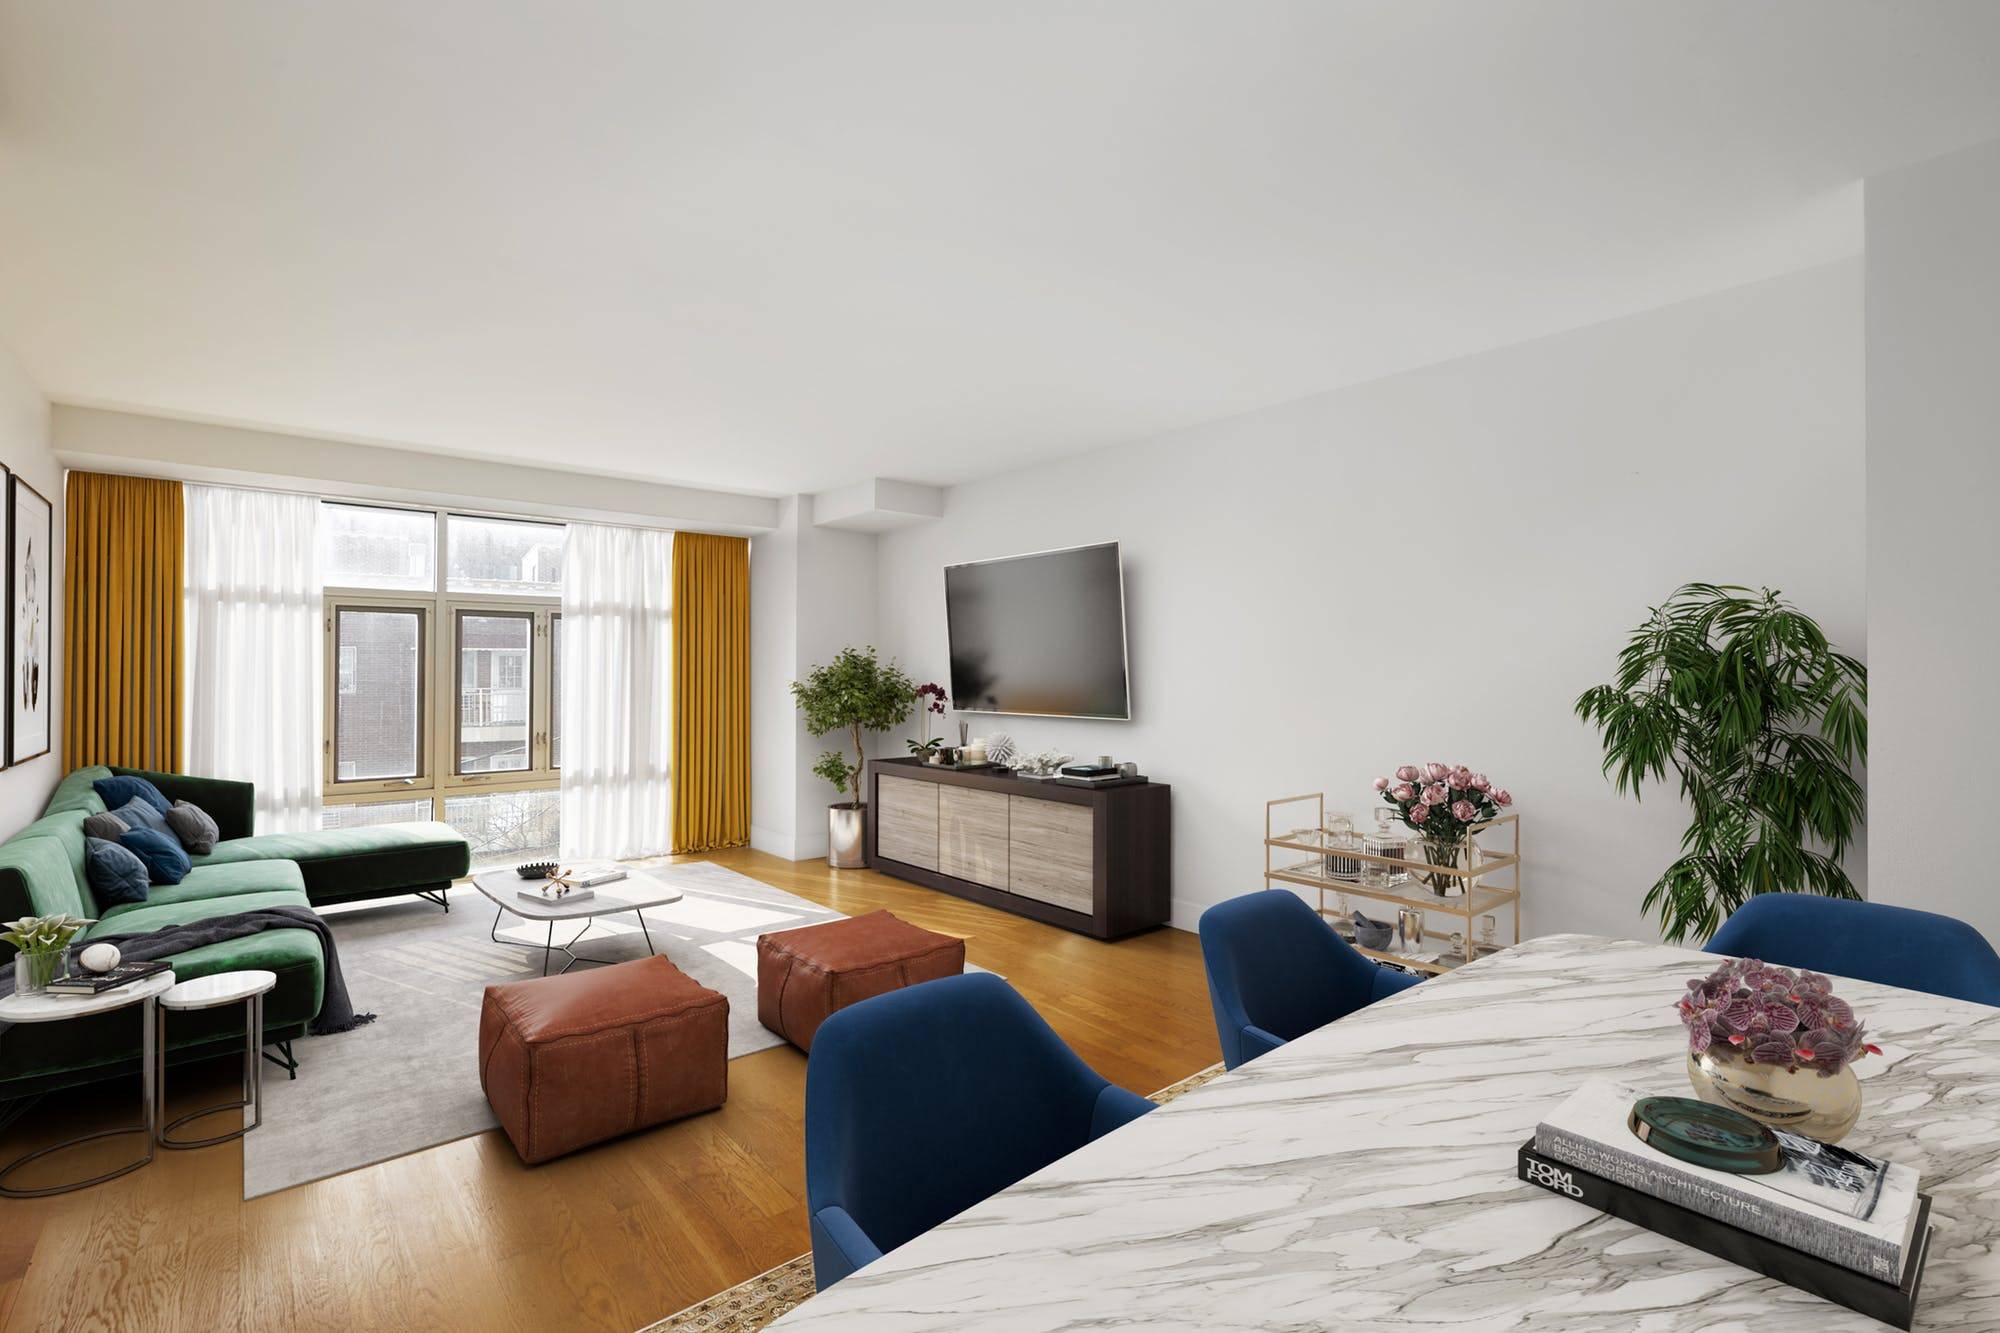 Welcome to Lofts QB ! Live in a gorgeous one bedroom layout that is as cozy as it is spacious.